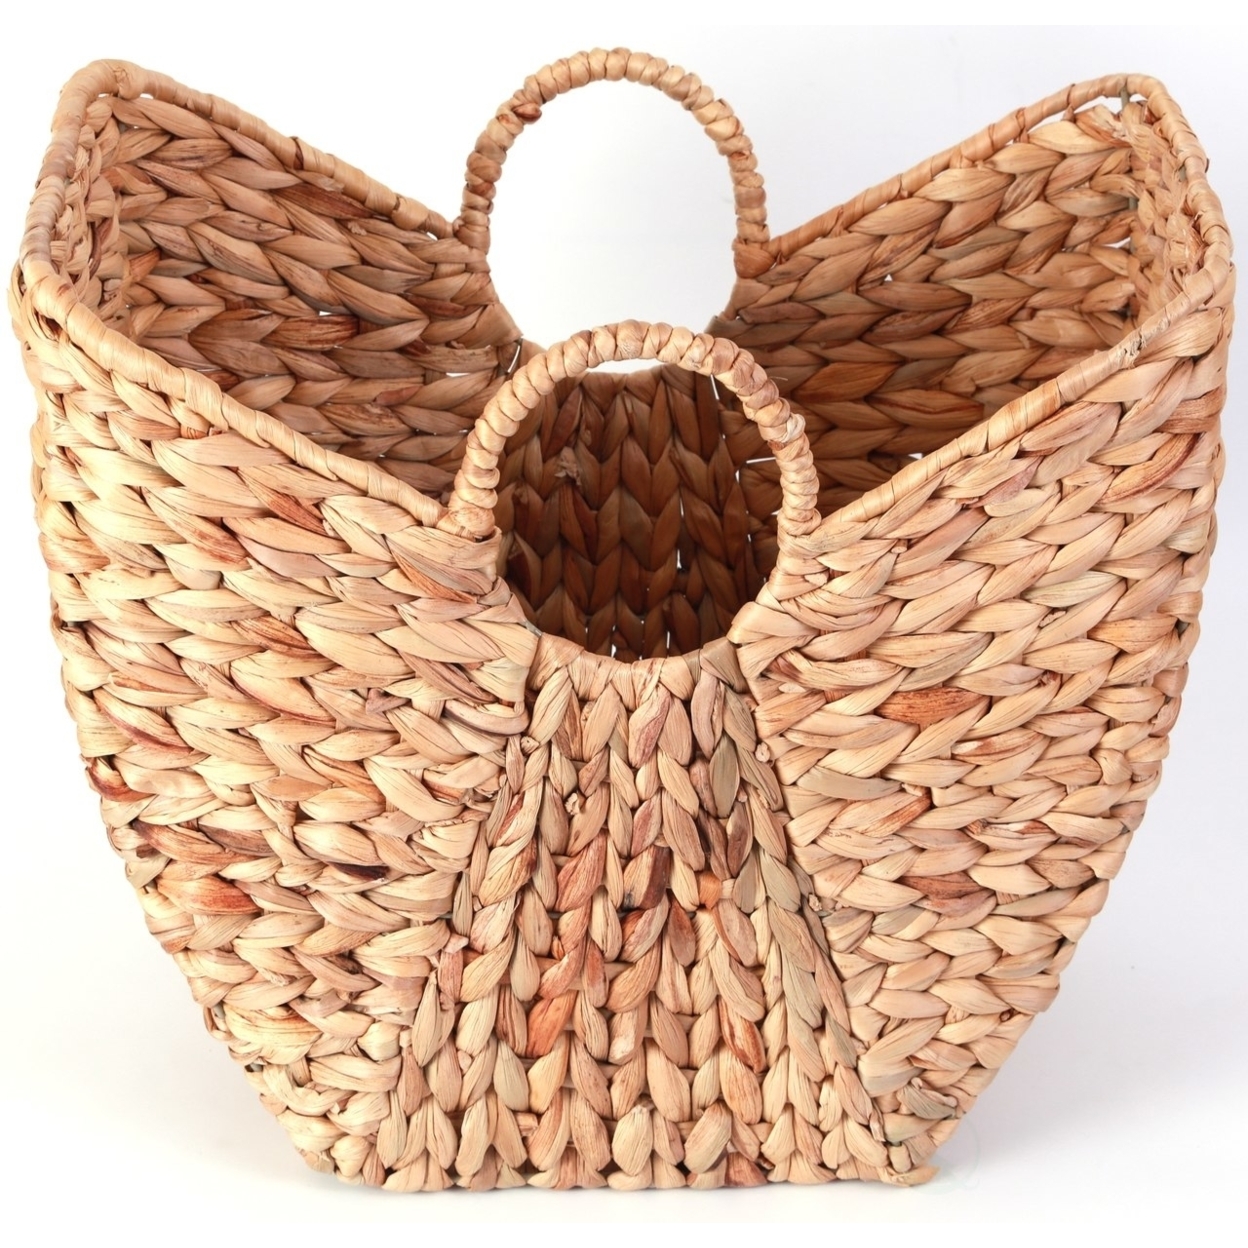 Large Wicker Laundry Basket With Round Handles